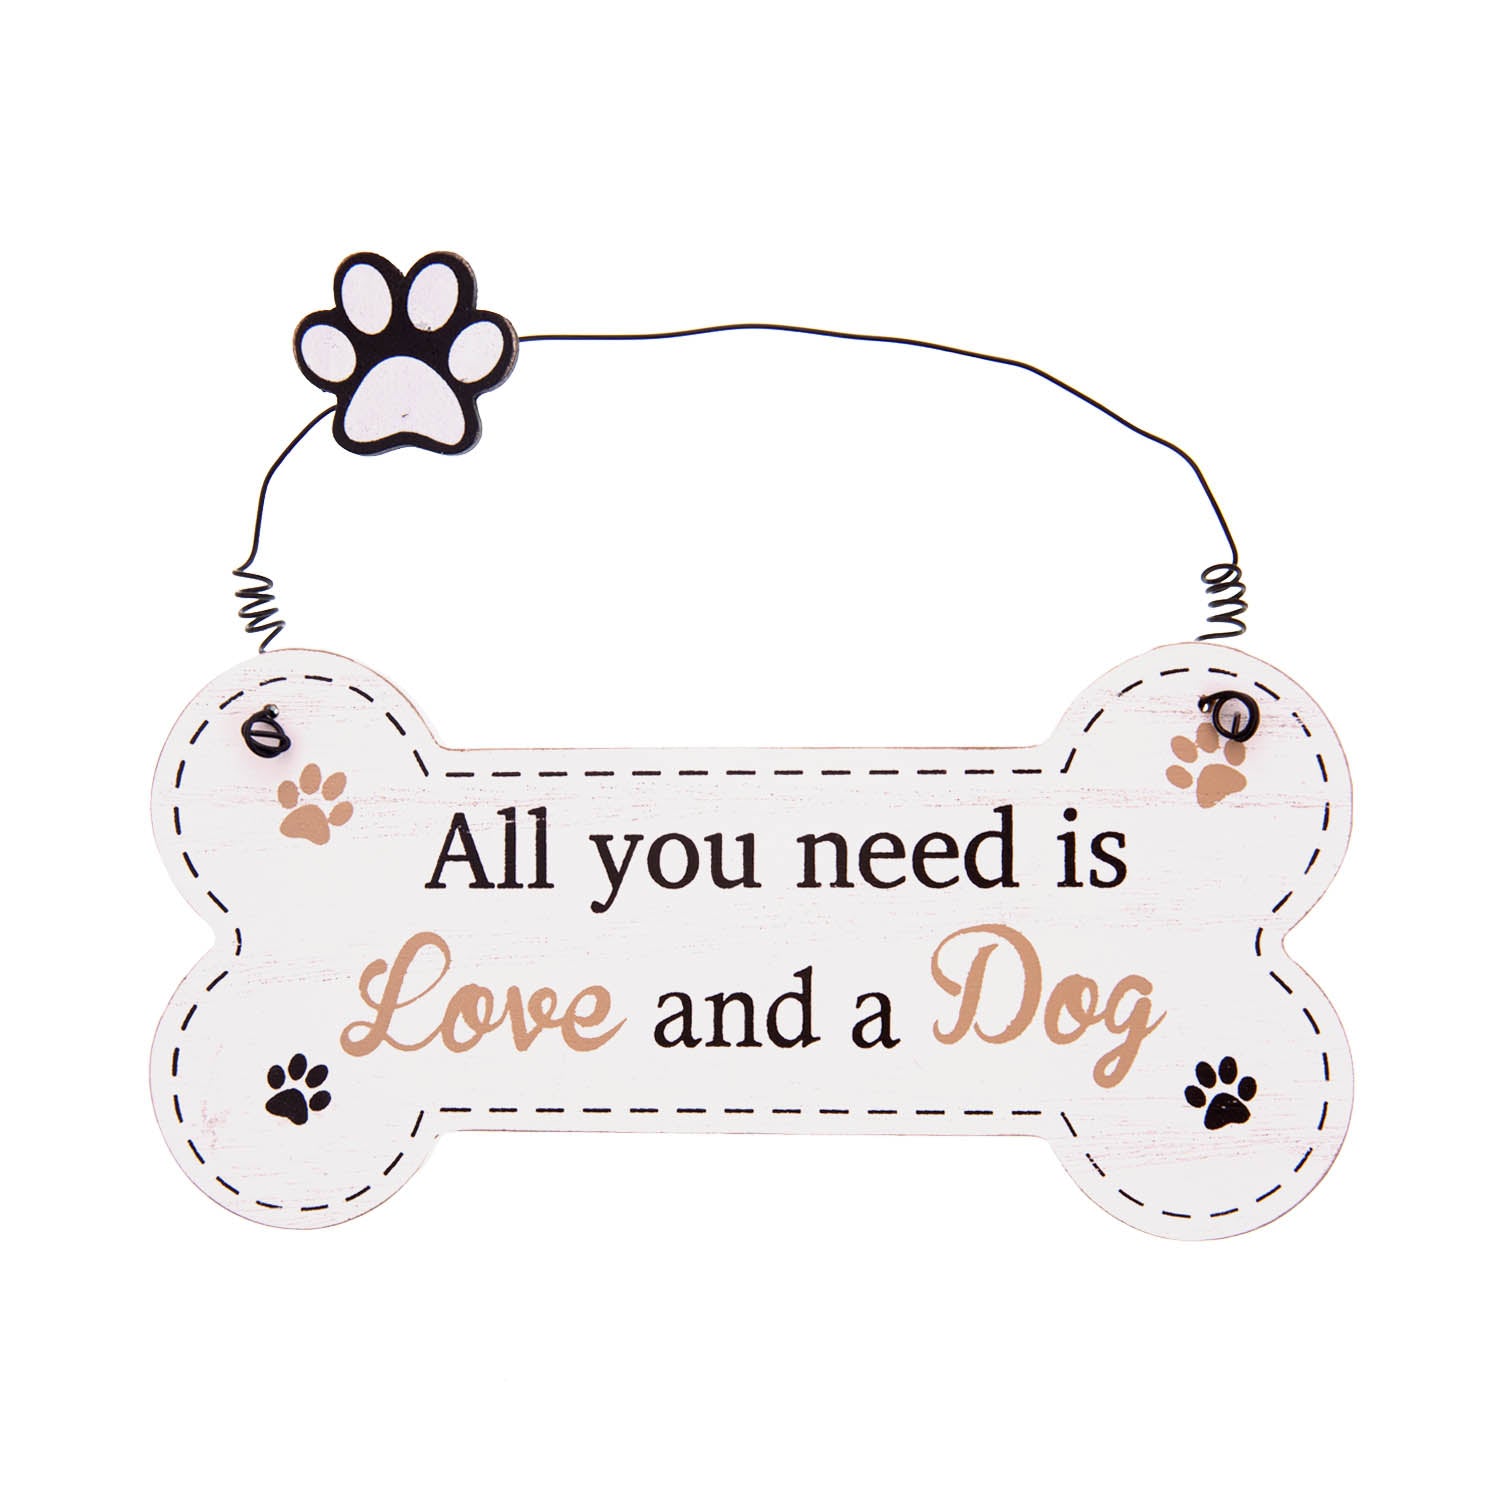 DogKrazyGifts - Doggie Pals Hanging Bone - All you need is Love and a Dog - part of the range of Dog Themed Signs available from Dog Krazy Gifts